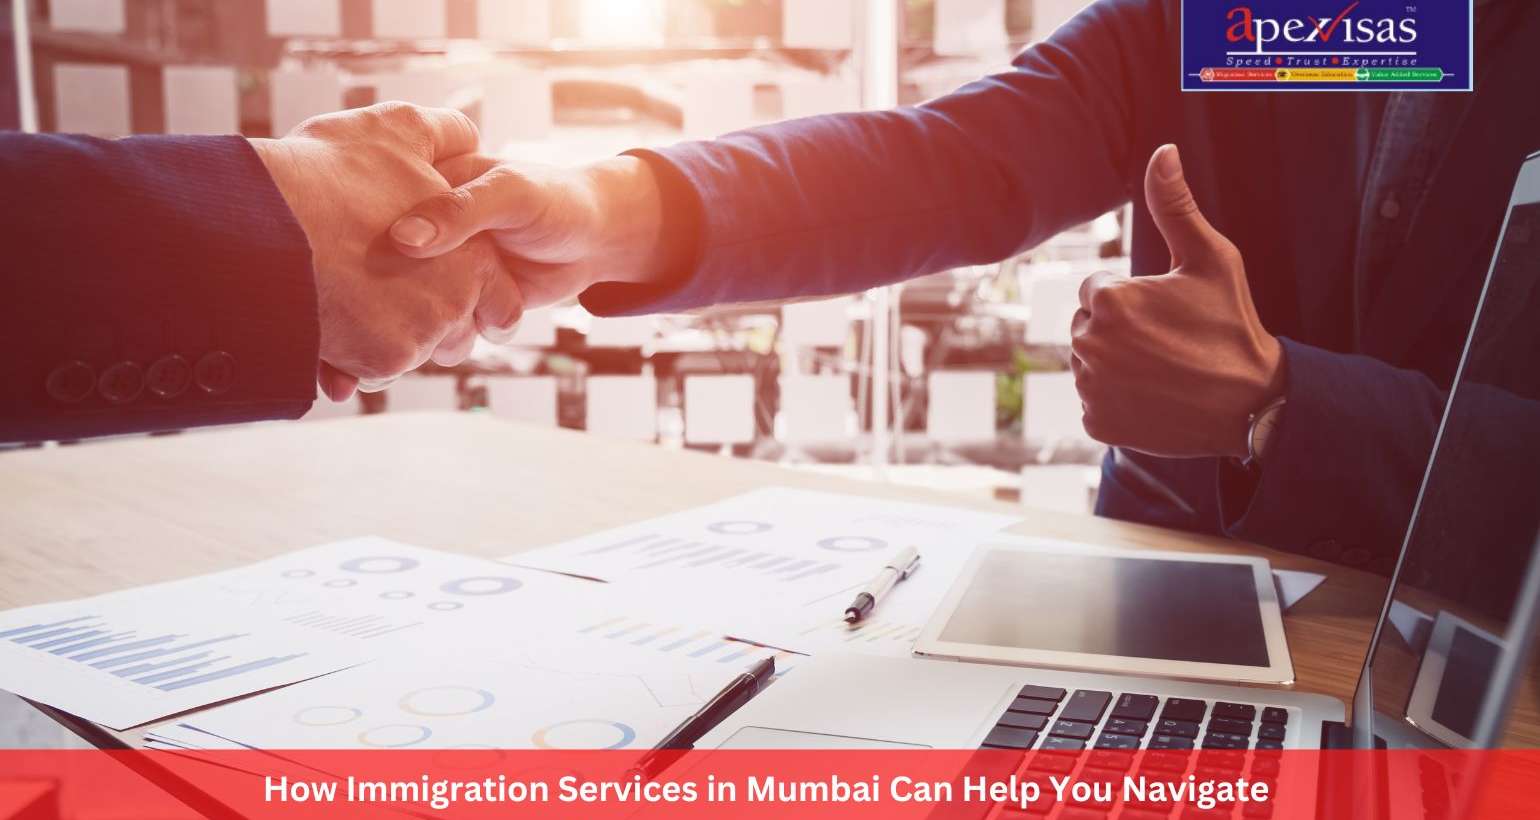 How Immigration Services in Mumbai Can Help You Navigate Complex Legal Processes